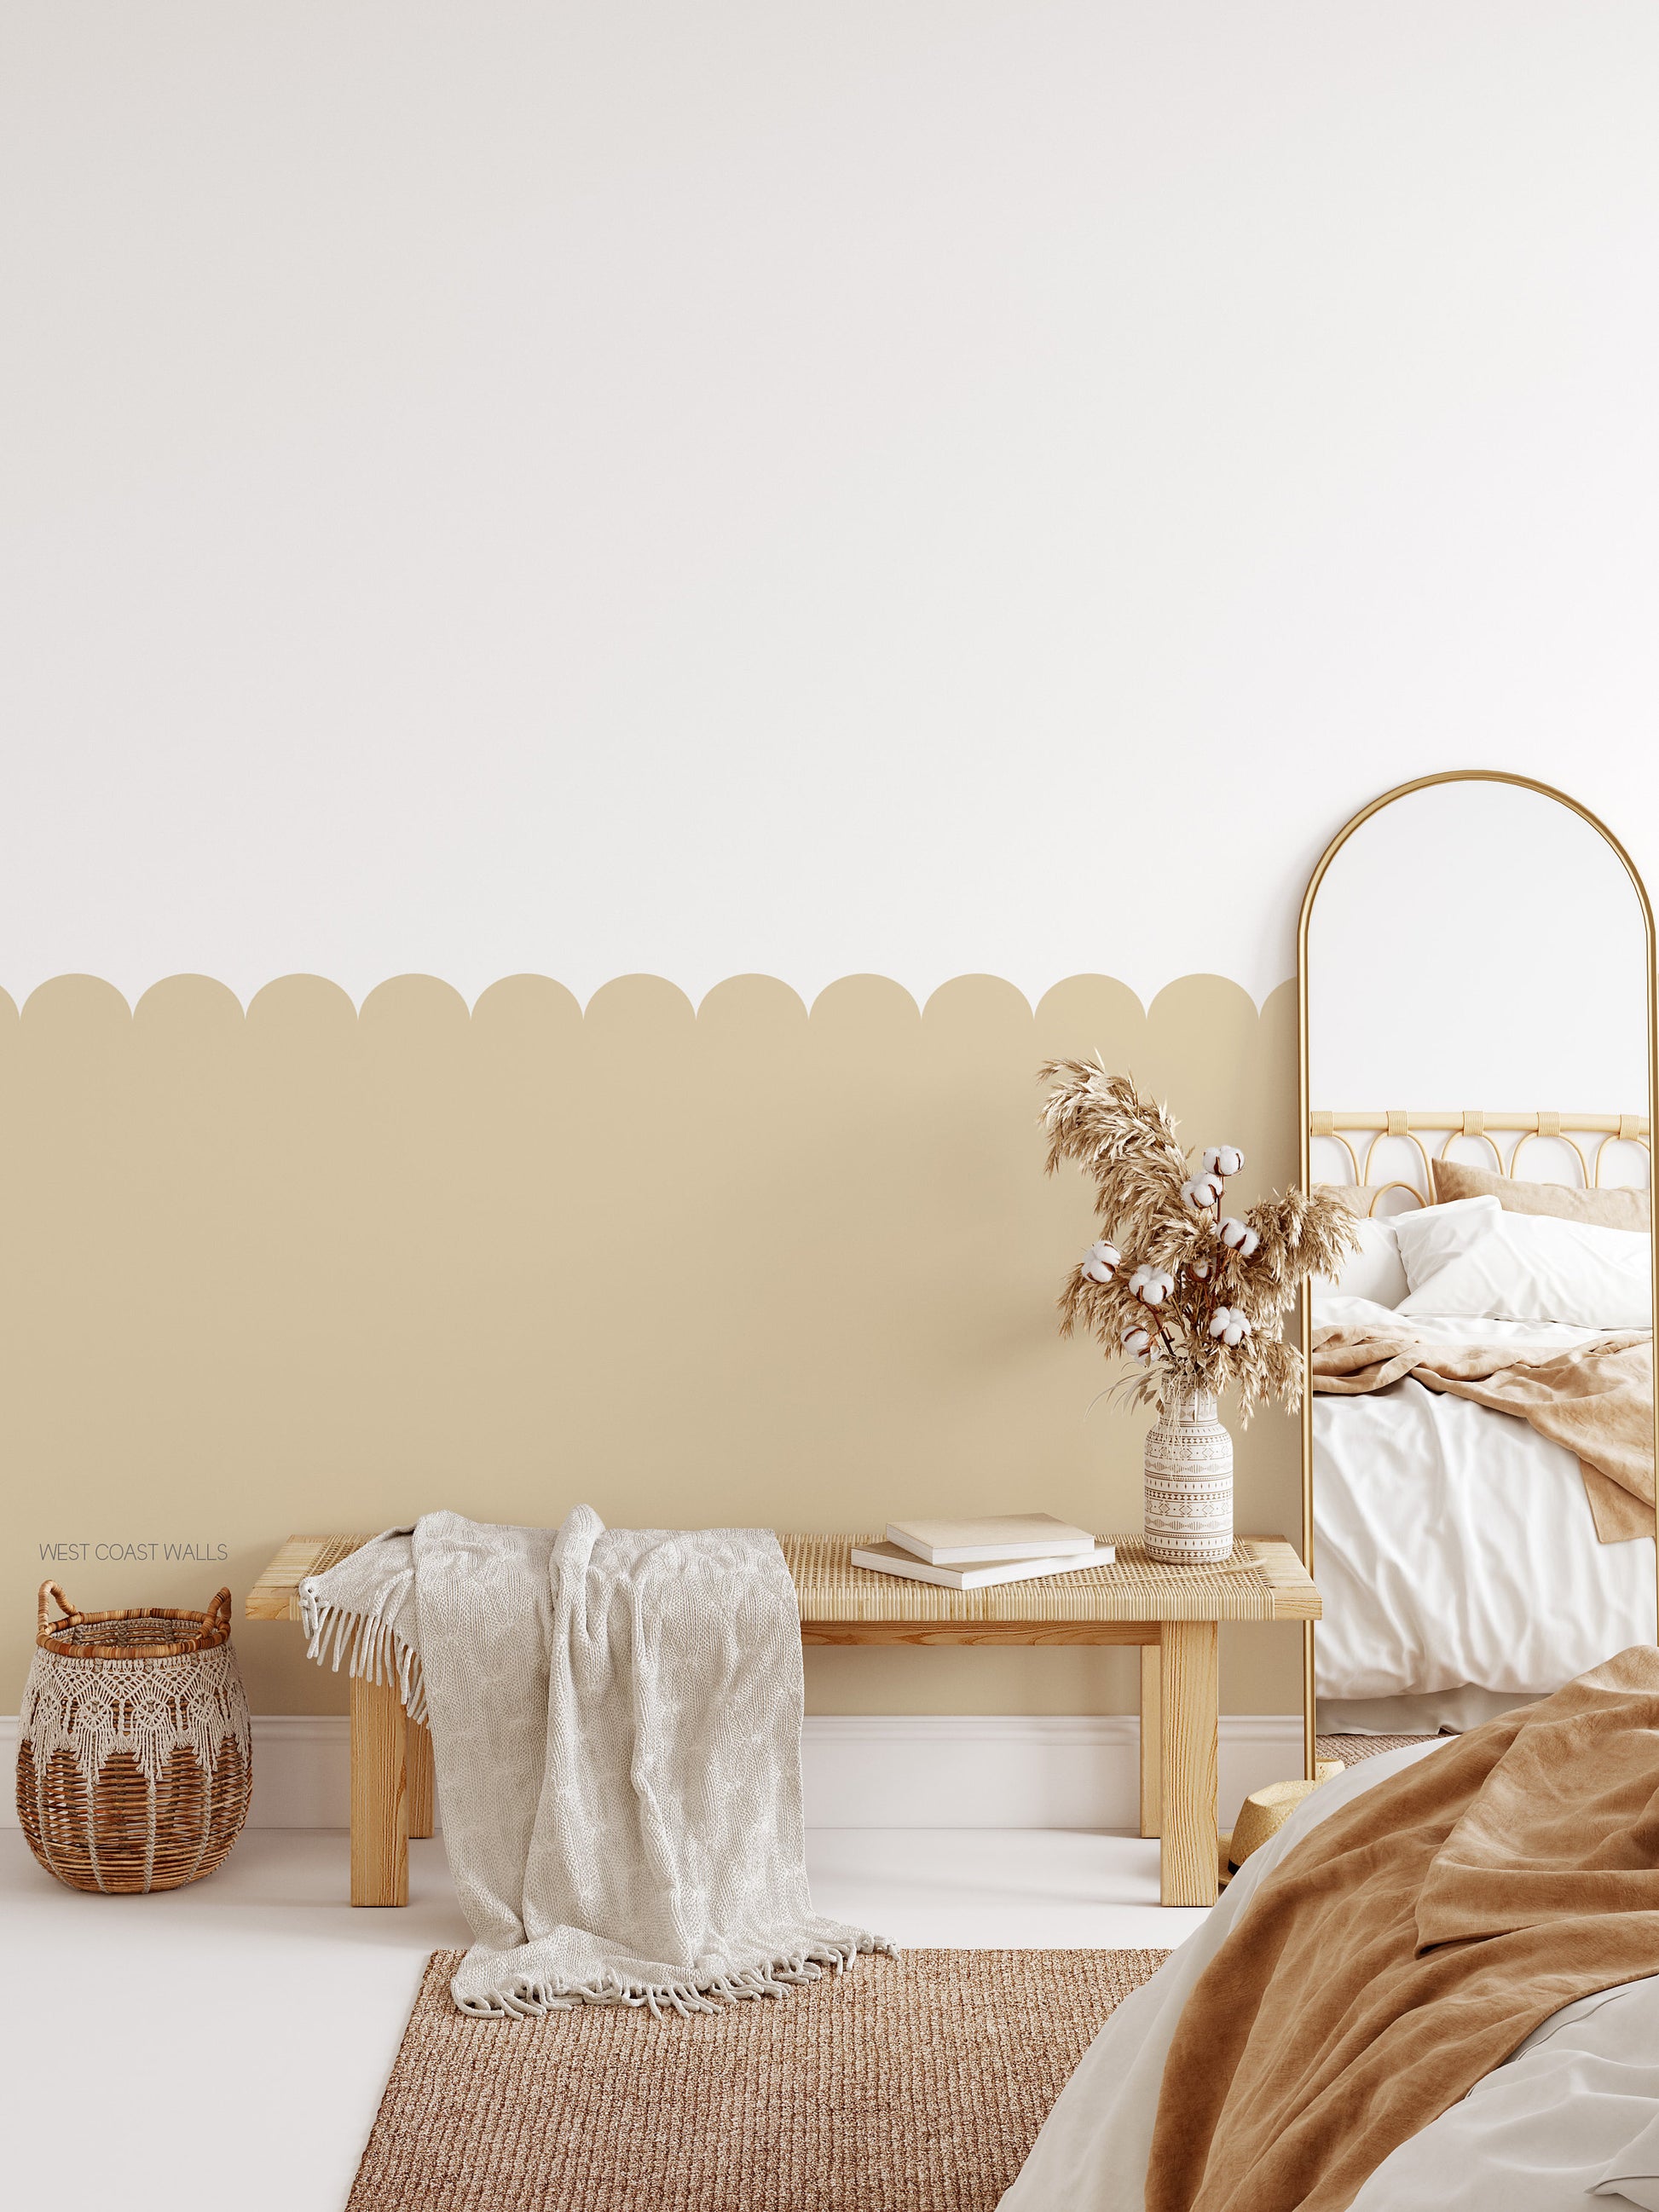 Scalloped Wall Decal